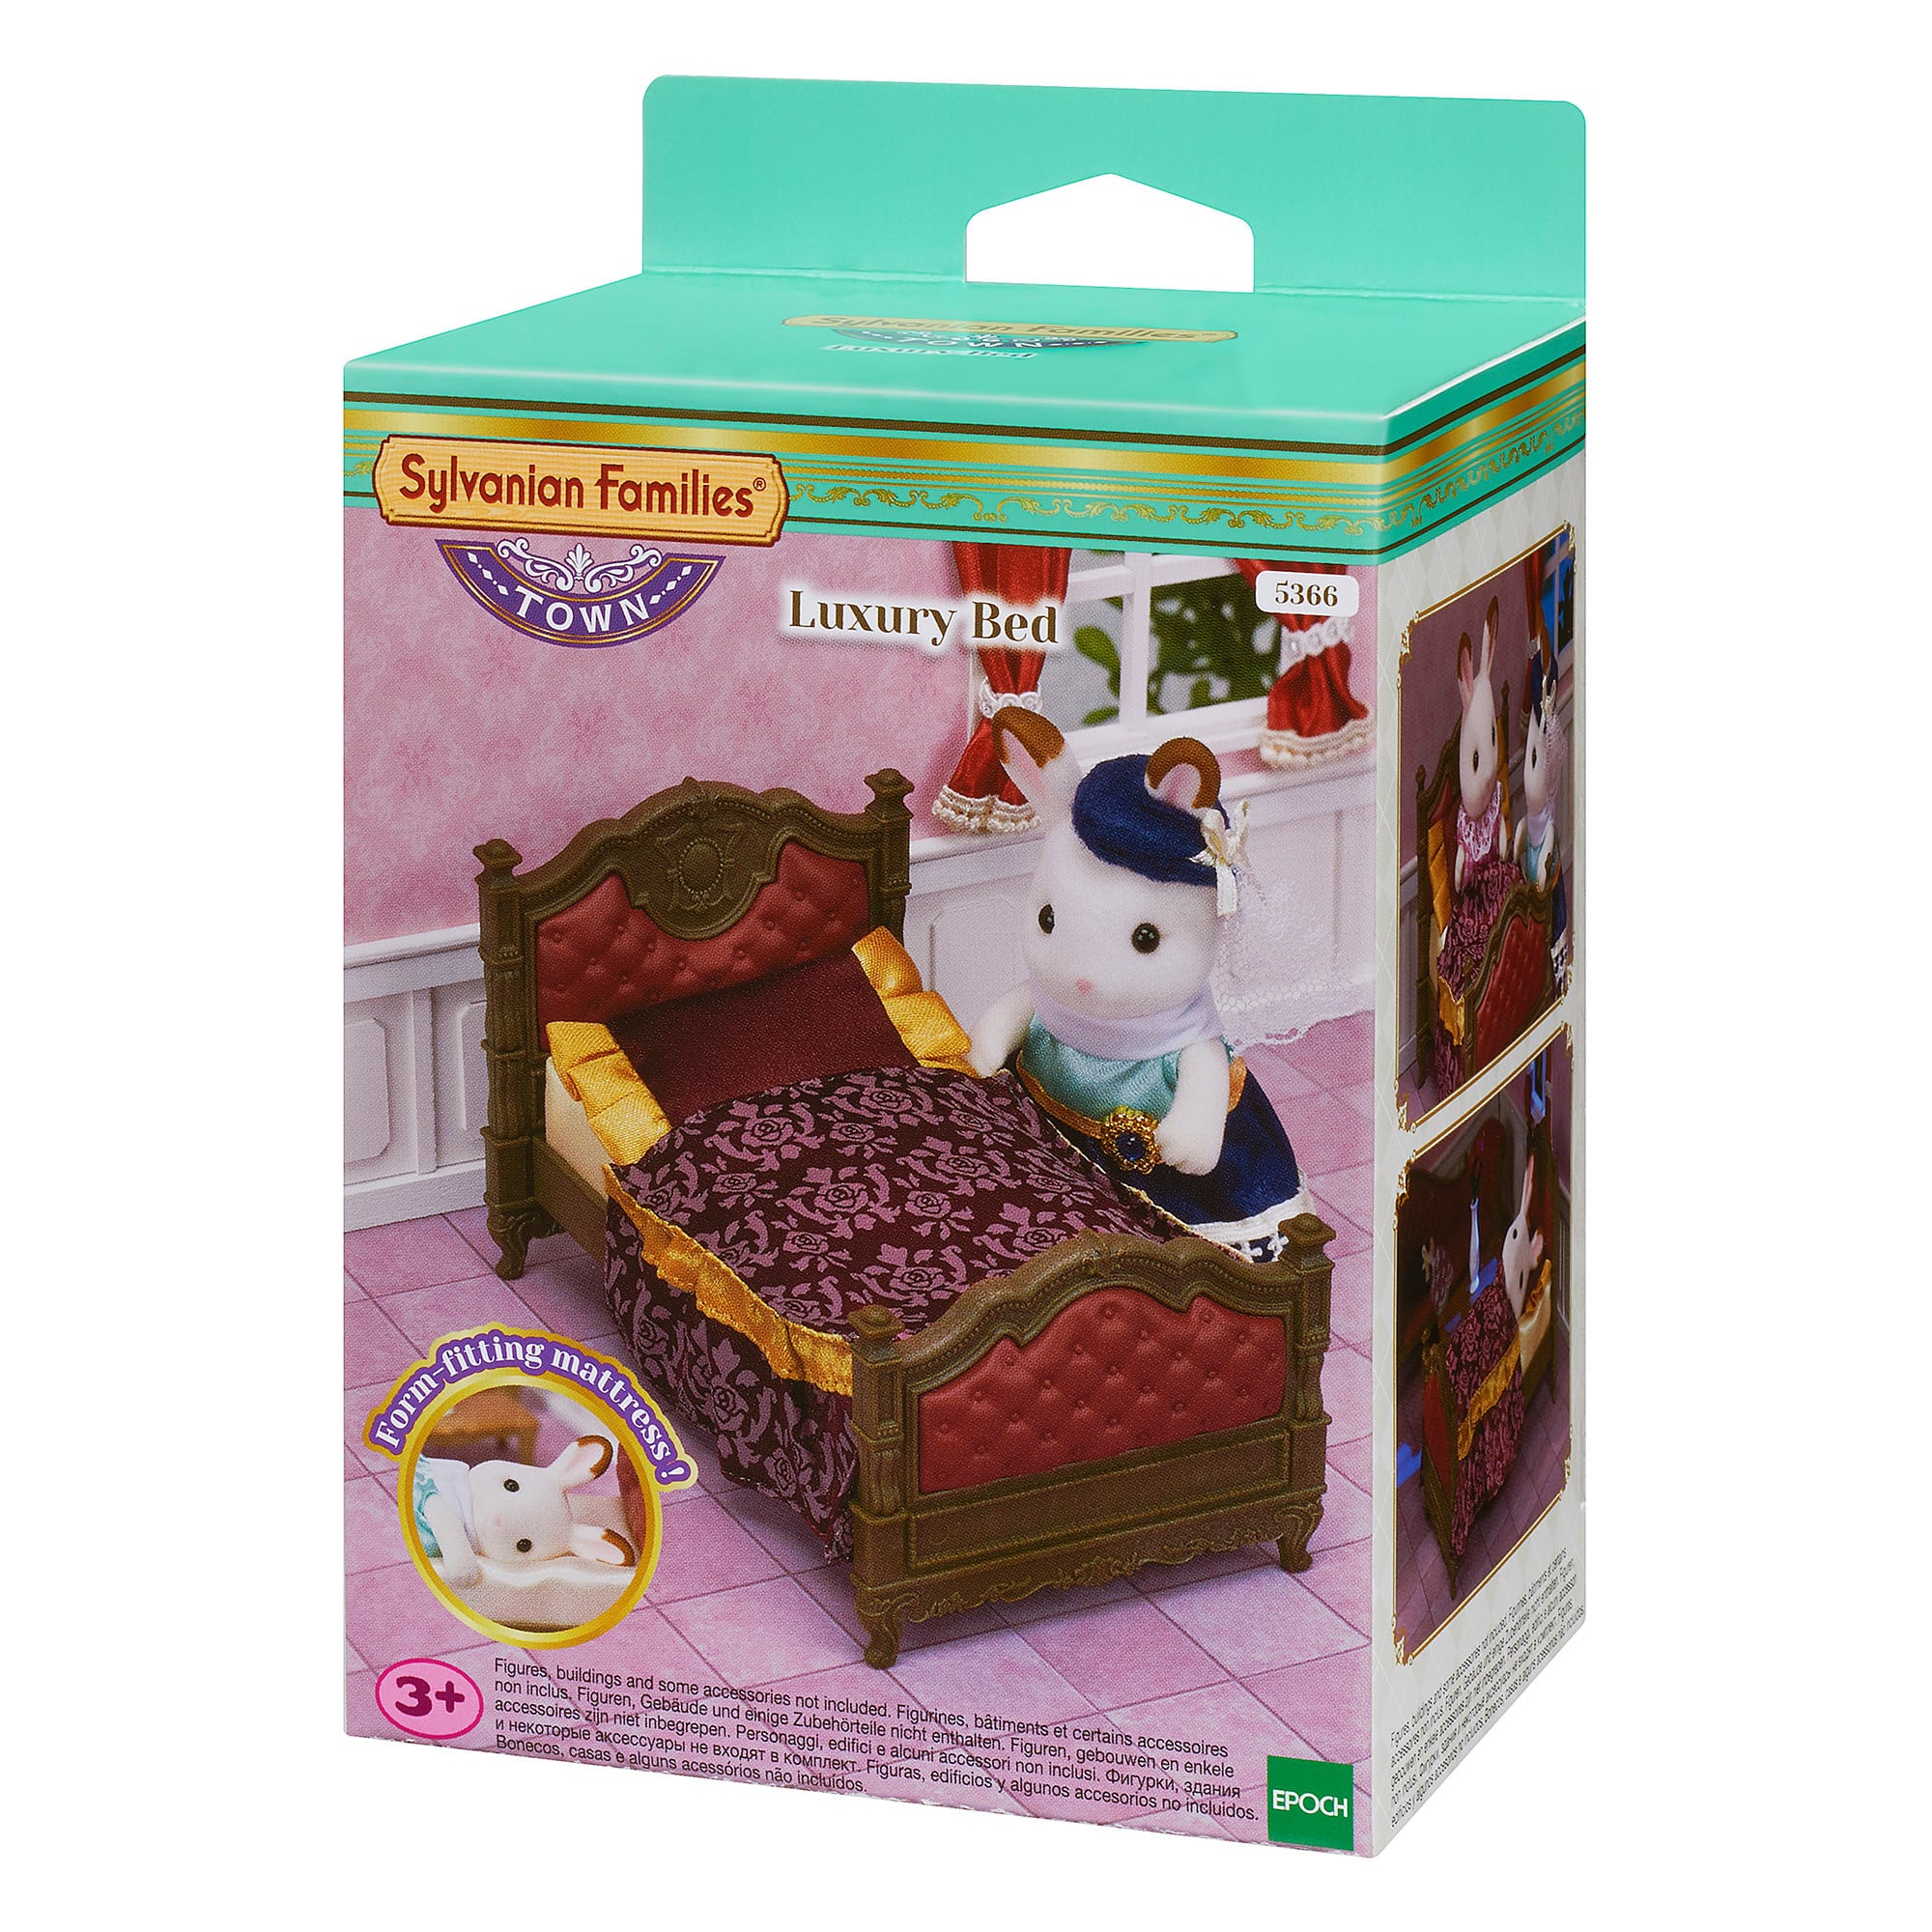 Sylvanian Families - Luxury Bed SF5366